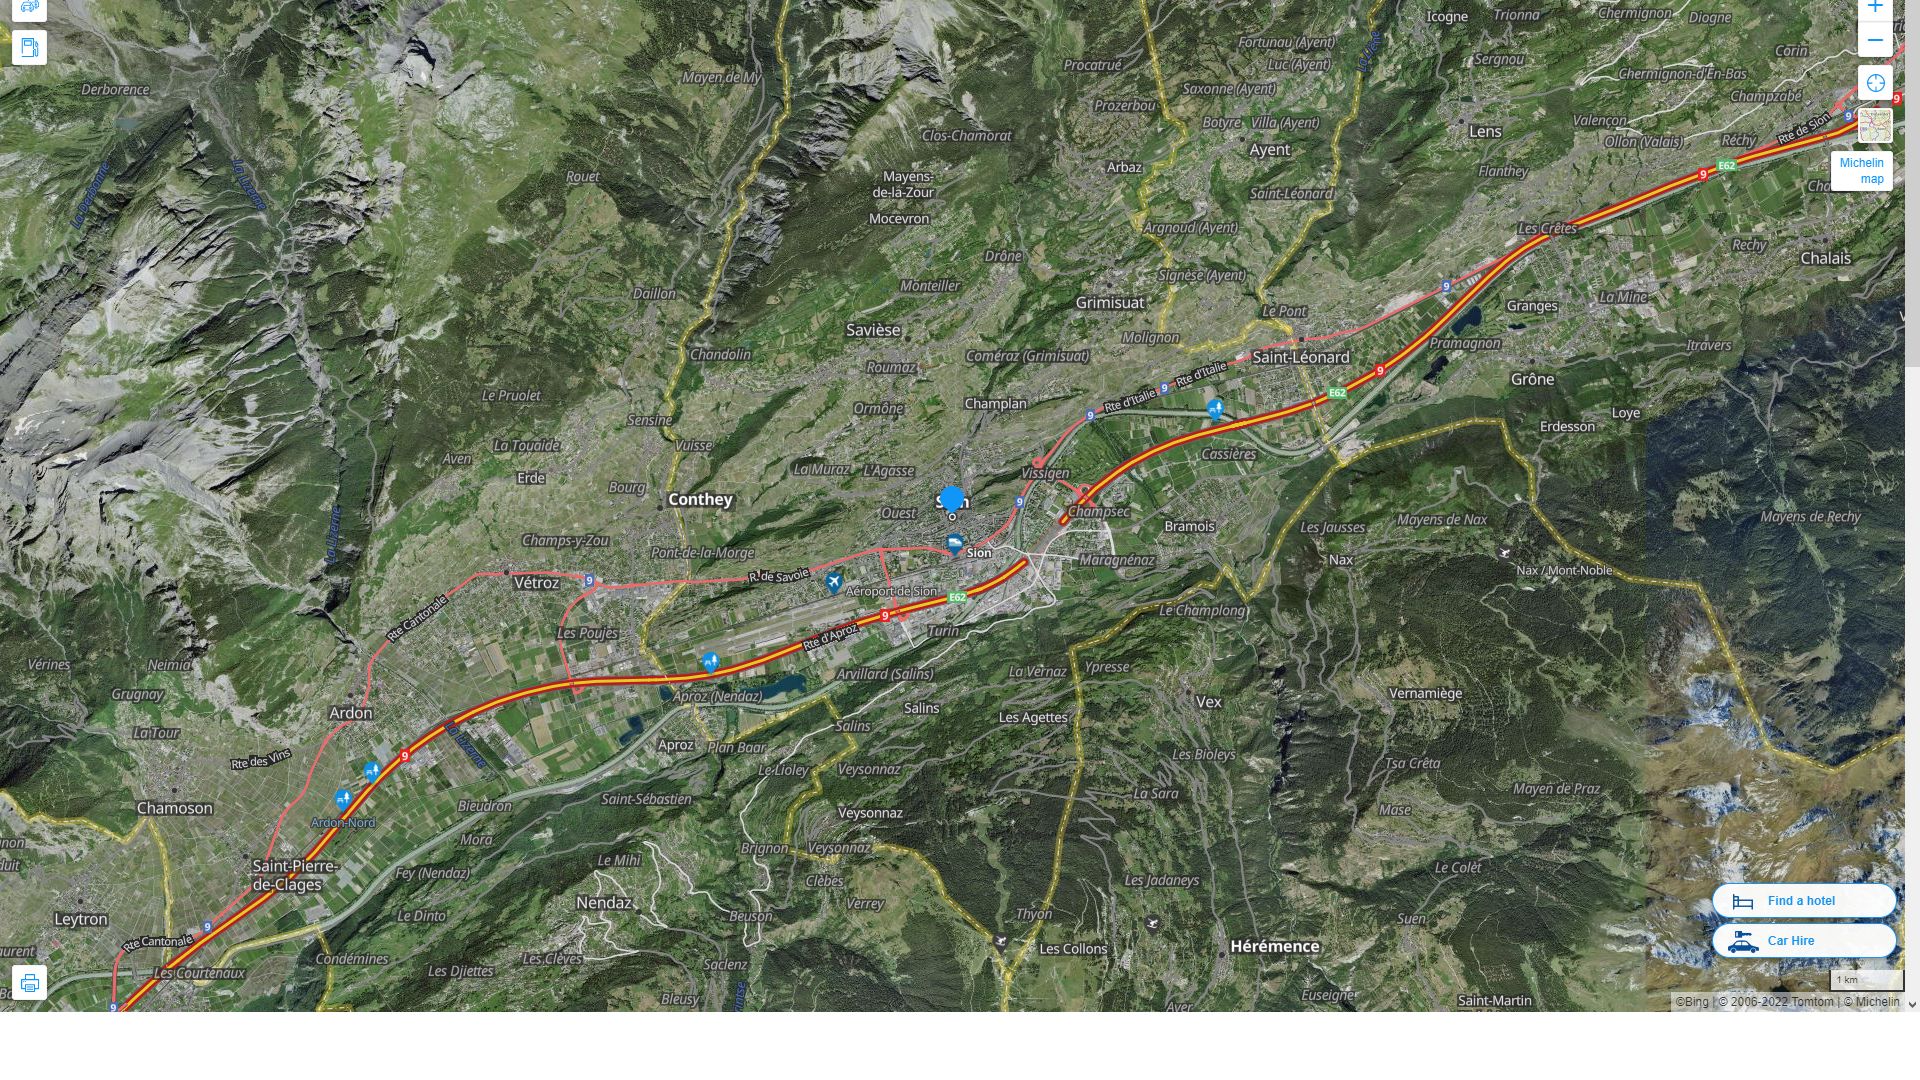 Sion Highway and Road Map with Satellite View